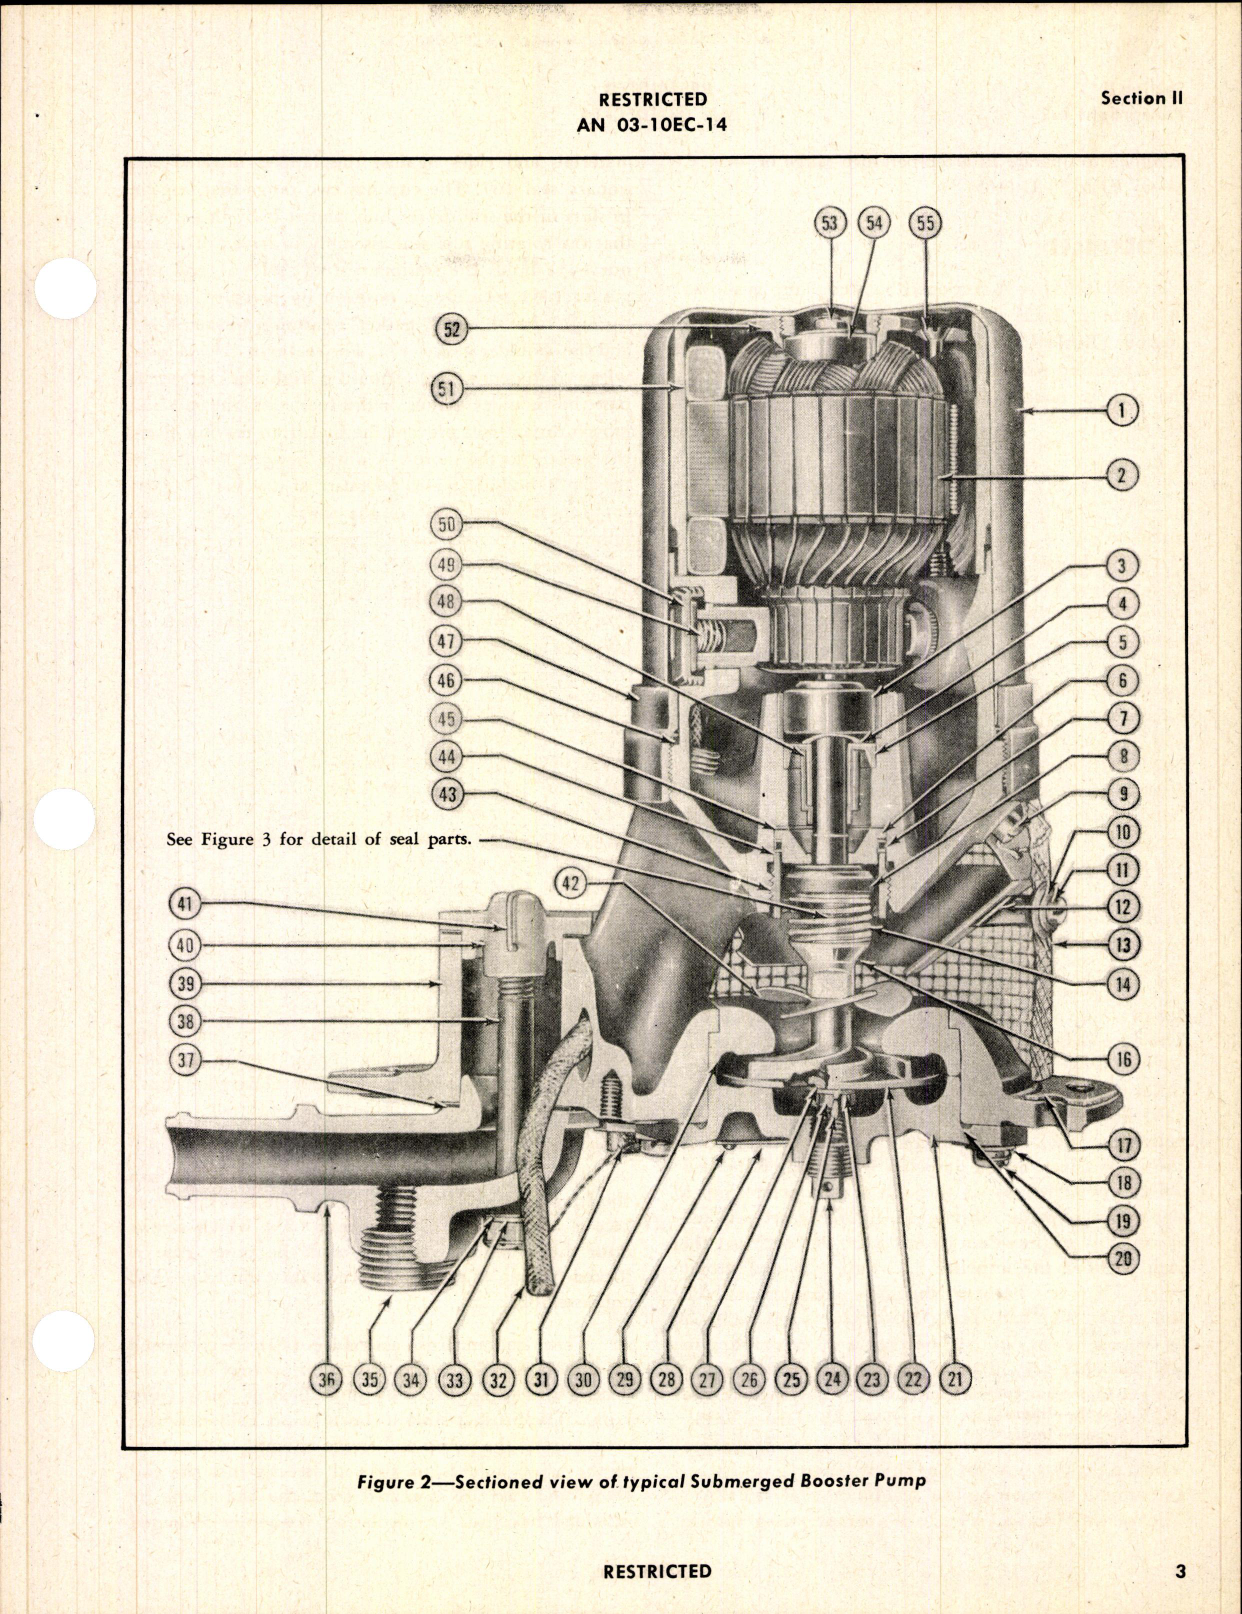 Sample page 7 from AirCorps Library document: Operation, Service, & Overhaul Inst w/ Parts Catalog for Submerged Type Booster Pumps